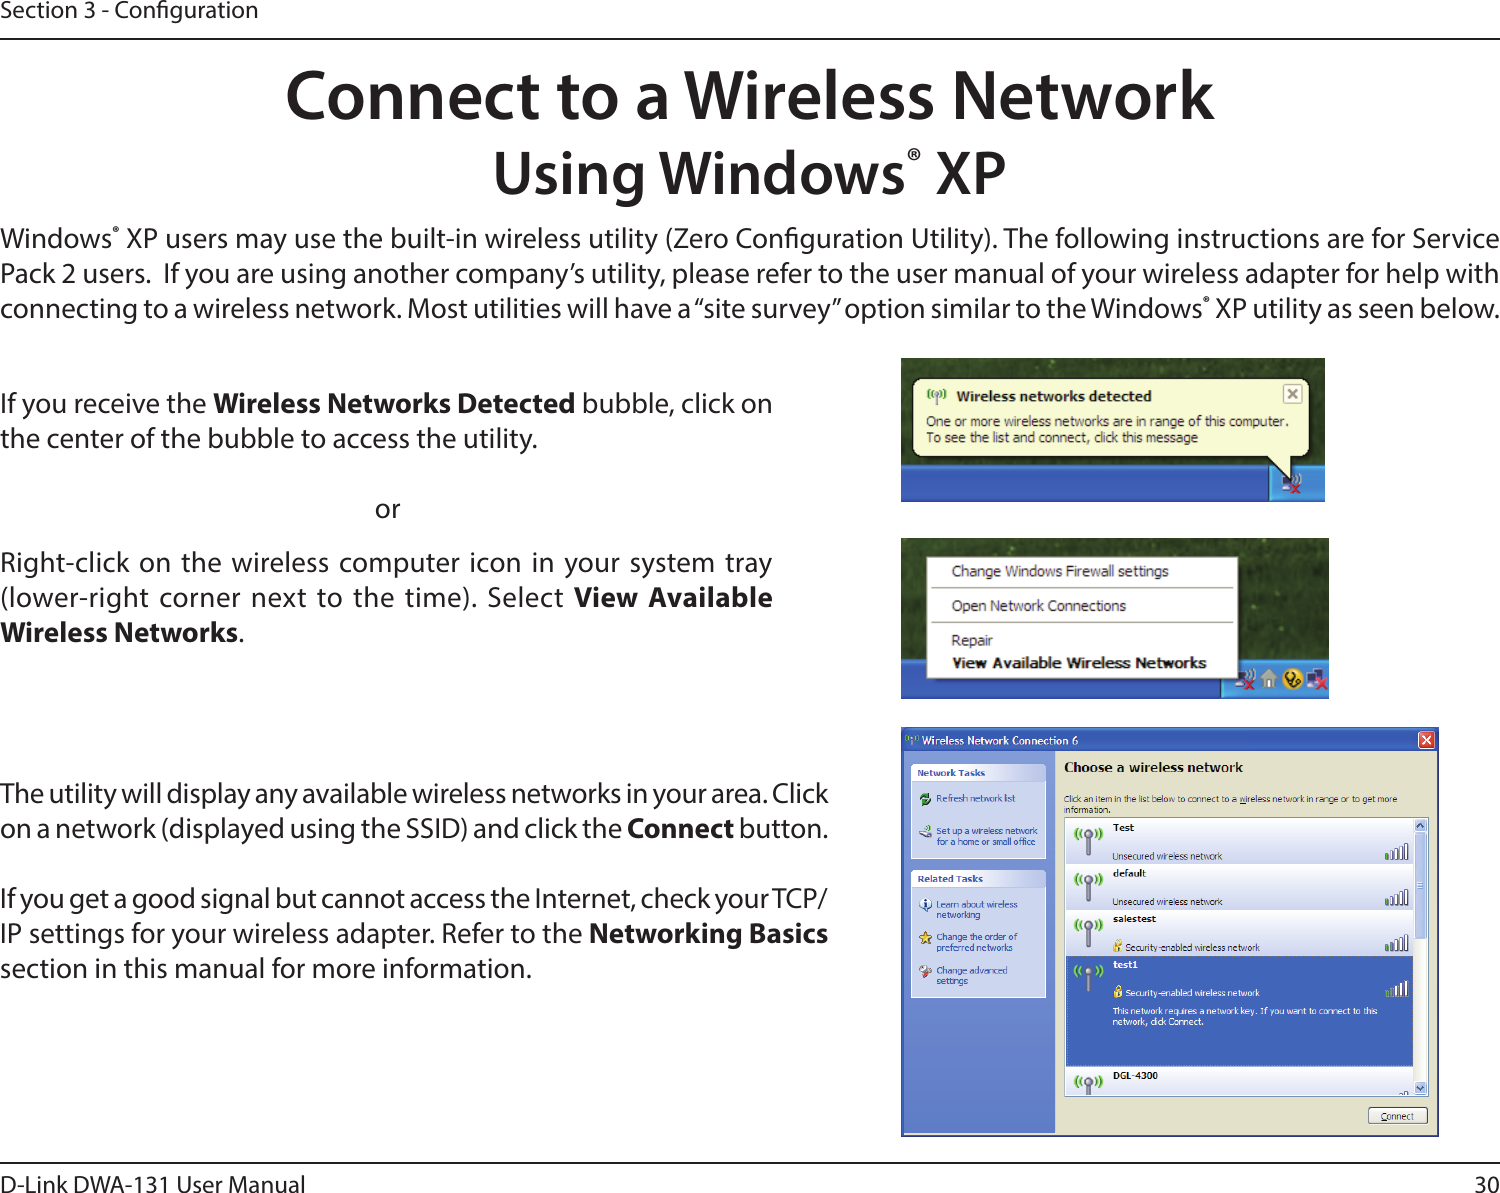 30D-Link DWA-131 User ManualSection 3 - CongurationConnect to a Wireless NetworkUsing Windows® XPWindows® XP users may use the built-in wireless utility (Zero Conguration Utility). The following instructions are for Service Pack 2 users.  If you are using another company’s utility, please refer to the user manual of your wireless adapter for help with connecting to a wireless network. Most utilities will have a “site survey” option similar to the Windows® XP utility as seen below.Right-click on the  wireless computer icon in your system tray (lower-right  corner next to the  time). Select View Available Wireless Networks.If you receive the Wireless Networks Detected bubble, click on the center of the bubble to access the utility.     orThe utility will display any available wireless networks in your area. Click on a network (displayed using the SSID) and click the Connect button.If you get a good signal but cannot access the Internet, check your TCP/IP settings for your wireless adapter. Refer to the Networking Basics section in this manual for more information.